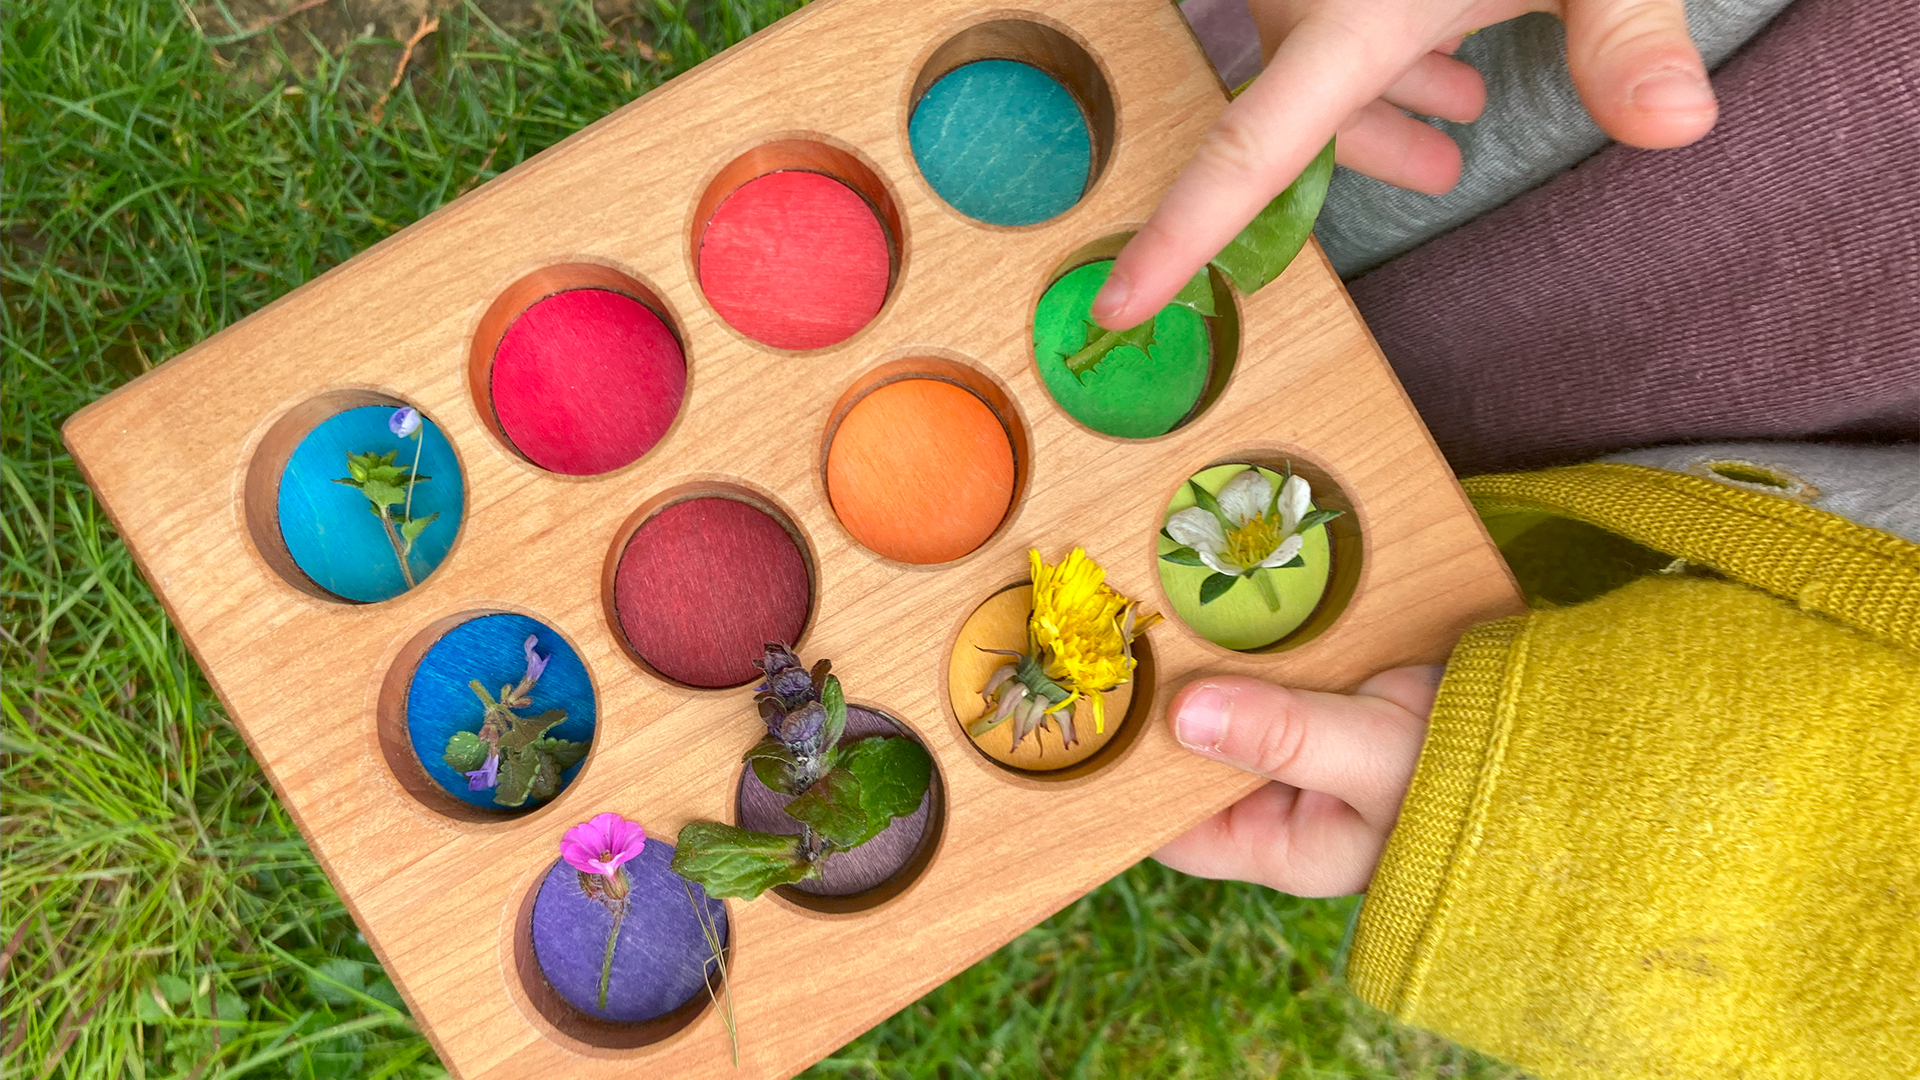 Get some fresh air - 9 ideas for outdoor play